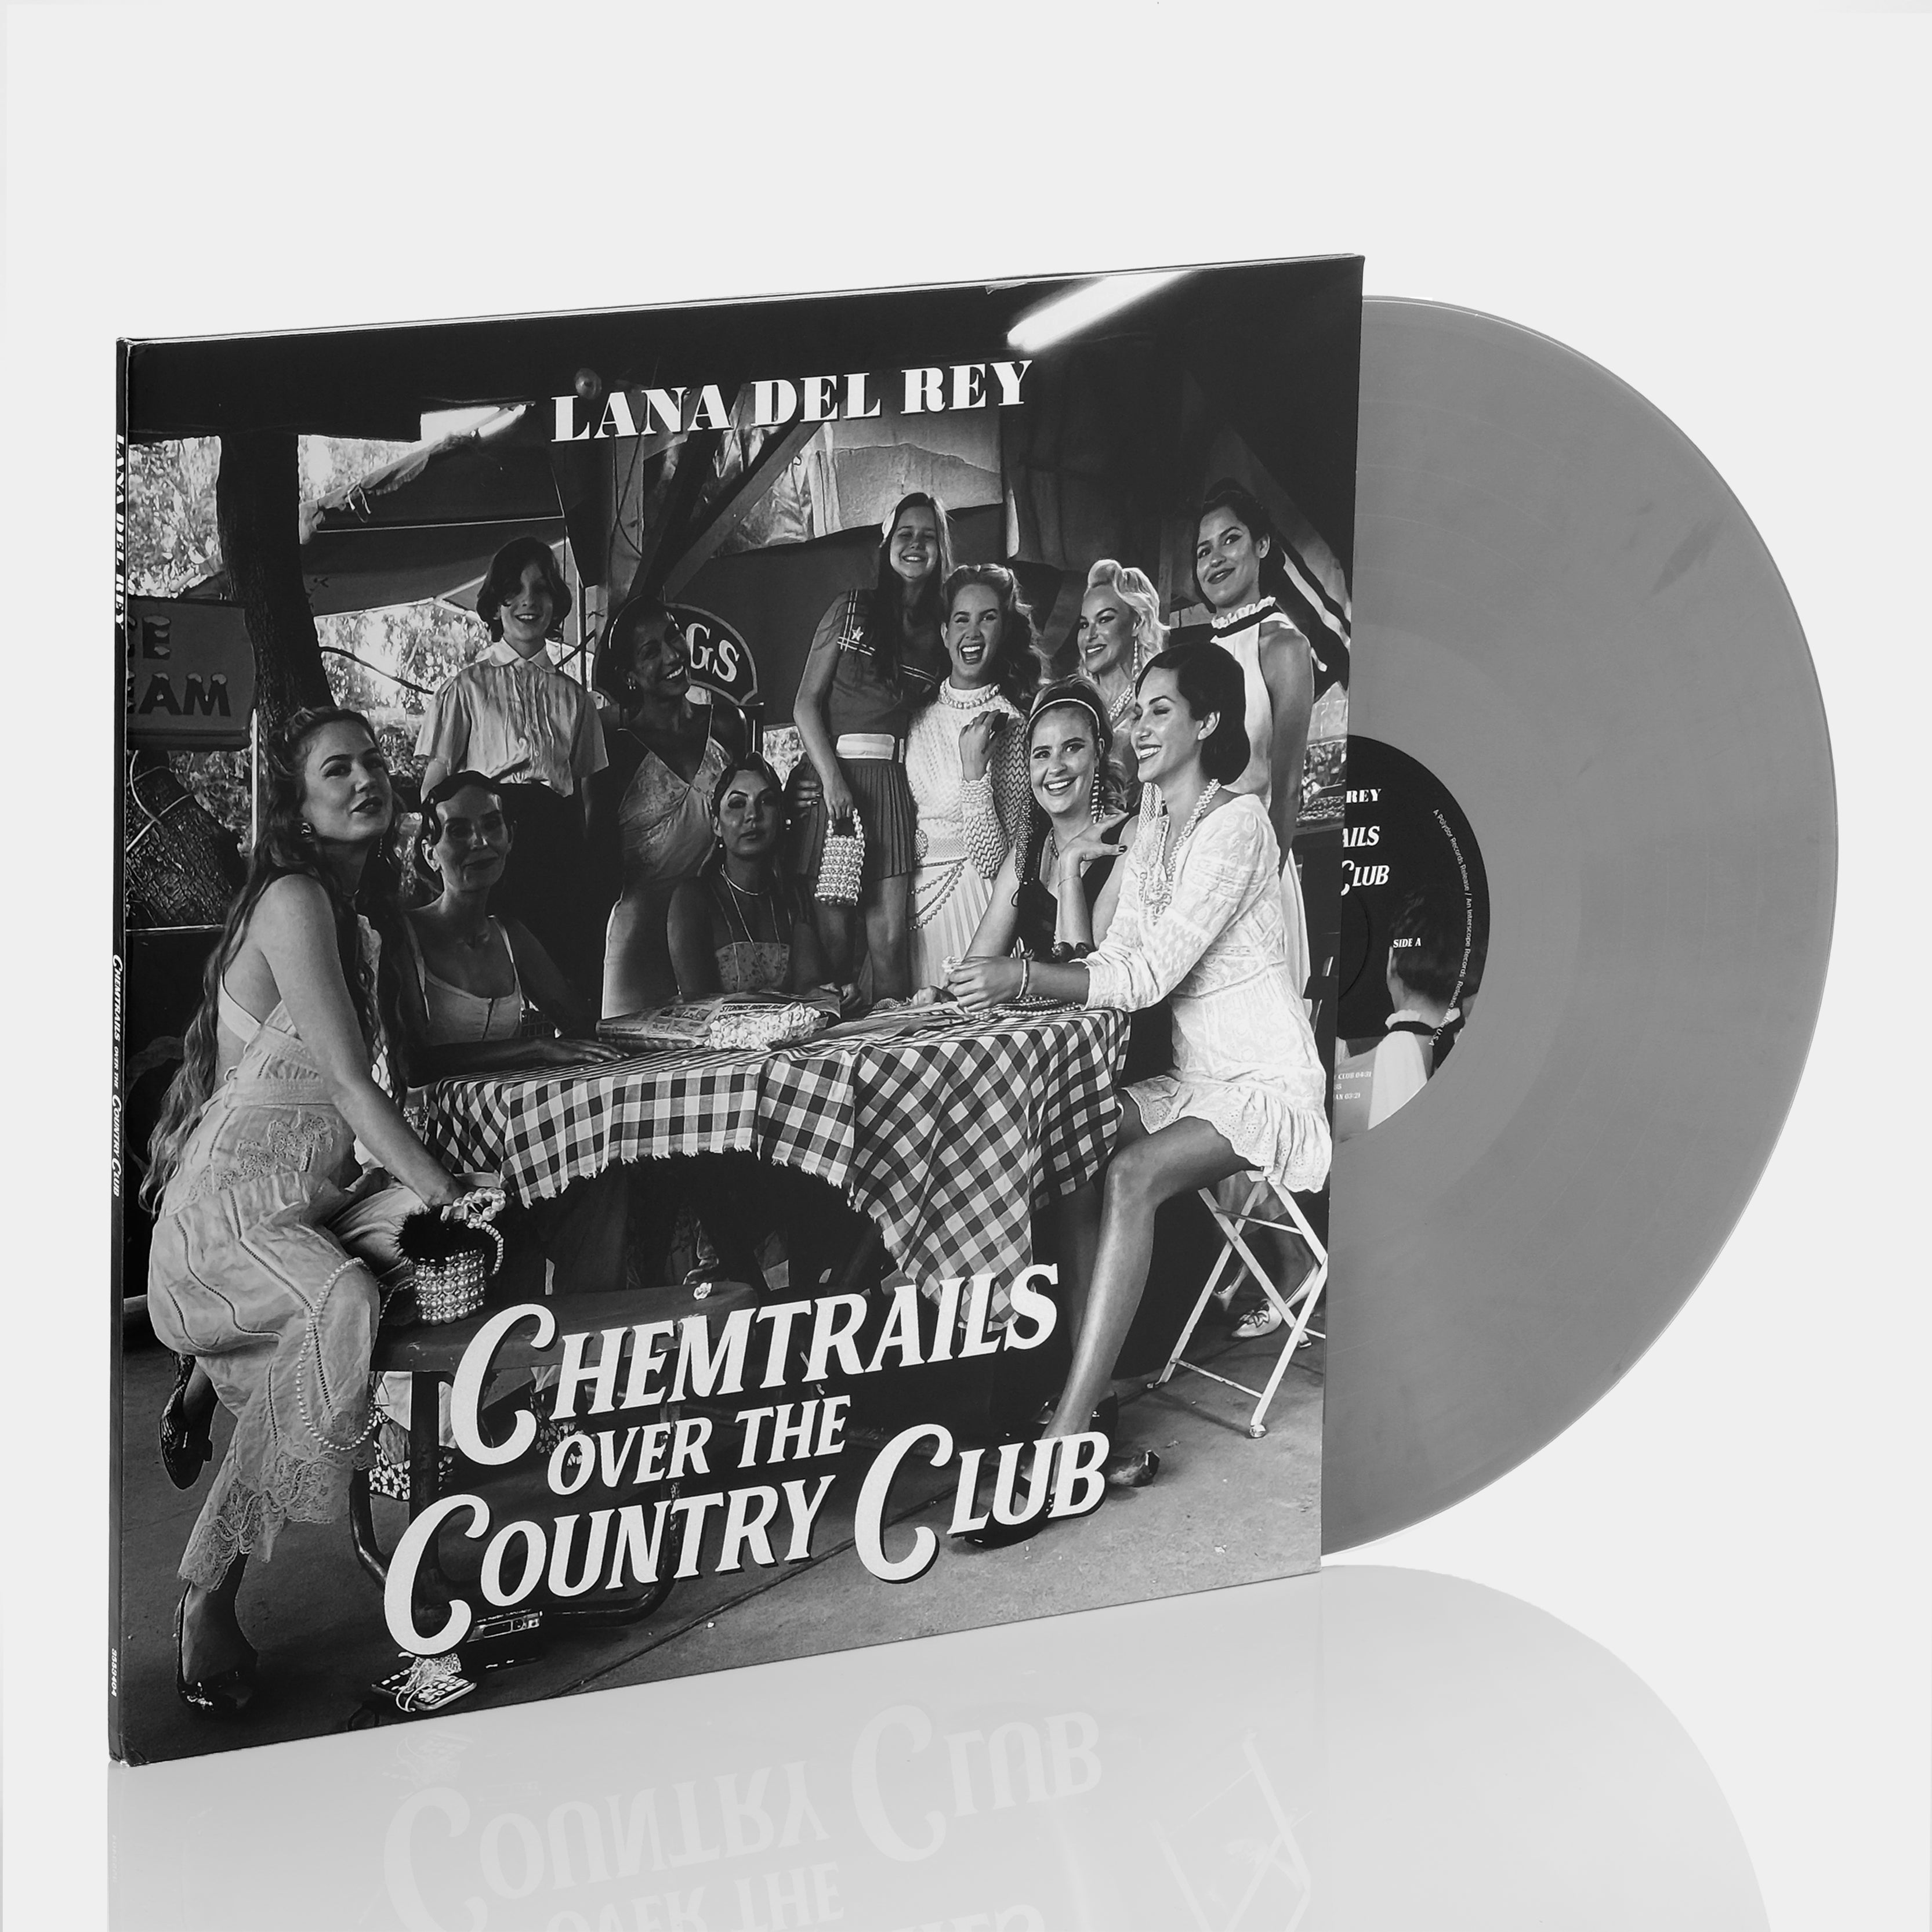 Lana Del Rey - Chemtrails Over The Country Club LP Grey Vinyl Record